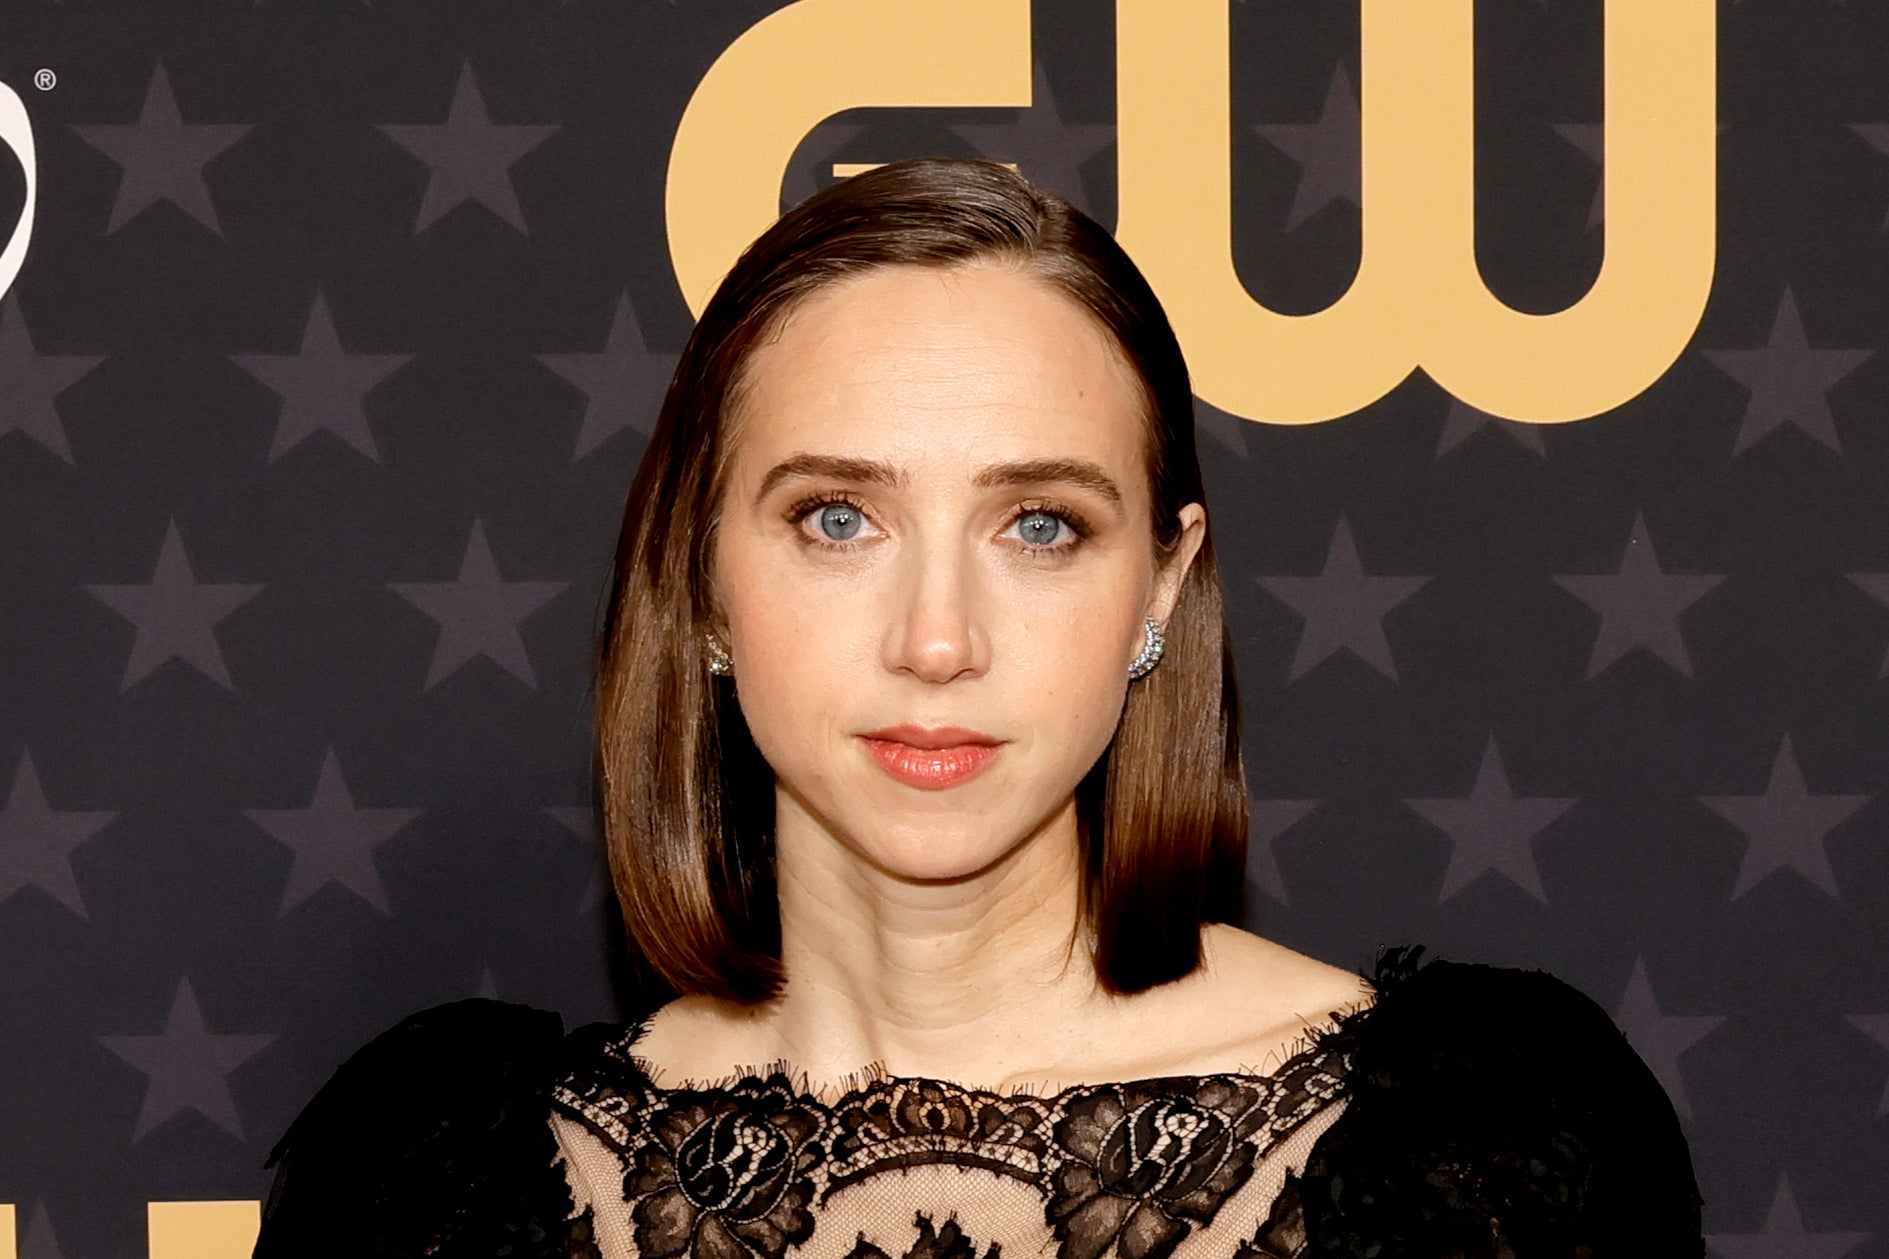 ‘Ruby Sparks’ actor Zoe Kazan said it was saddened that Glazer’s speech ‘could even be considered a political stance’